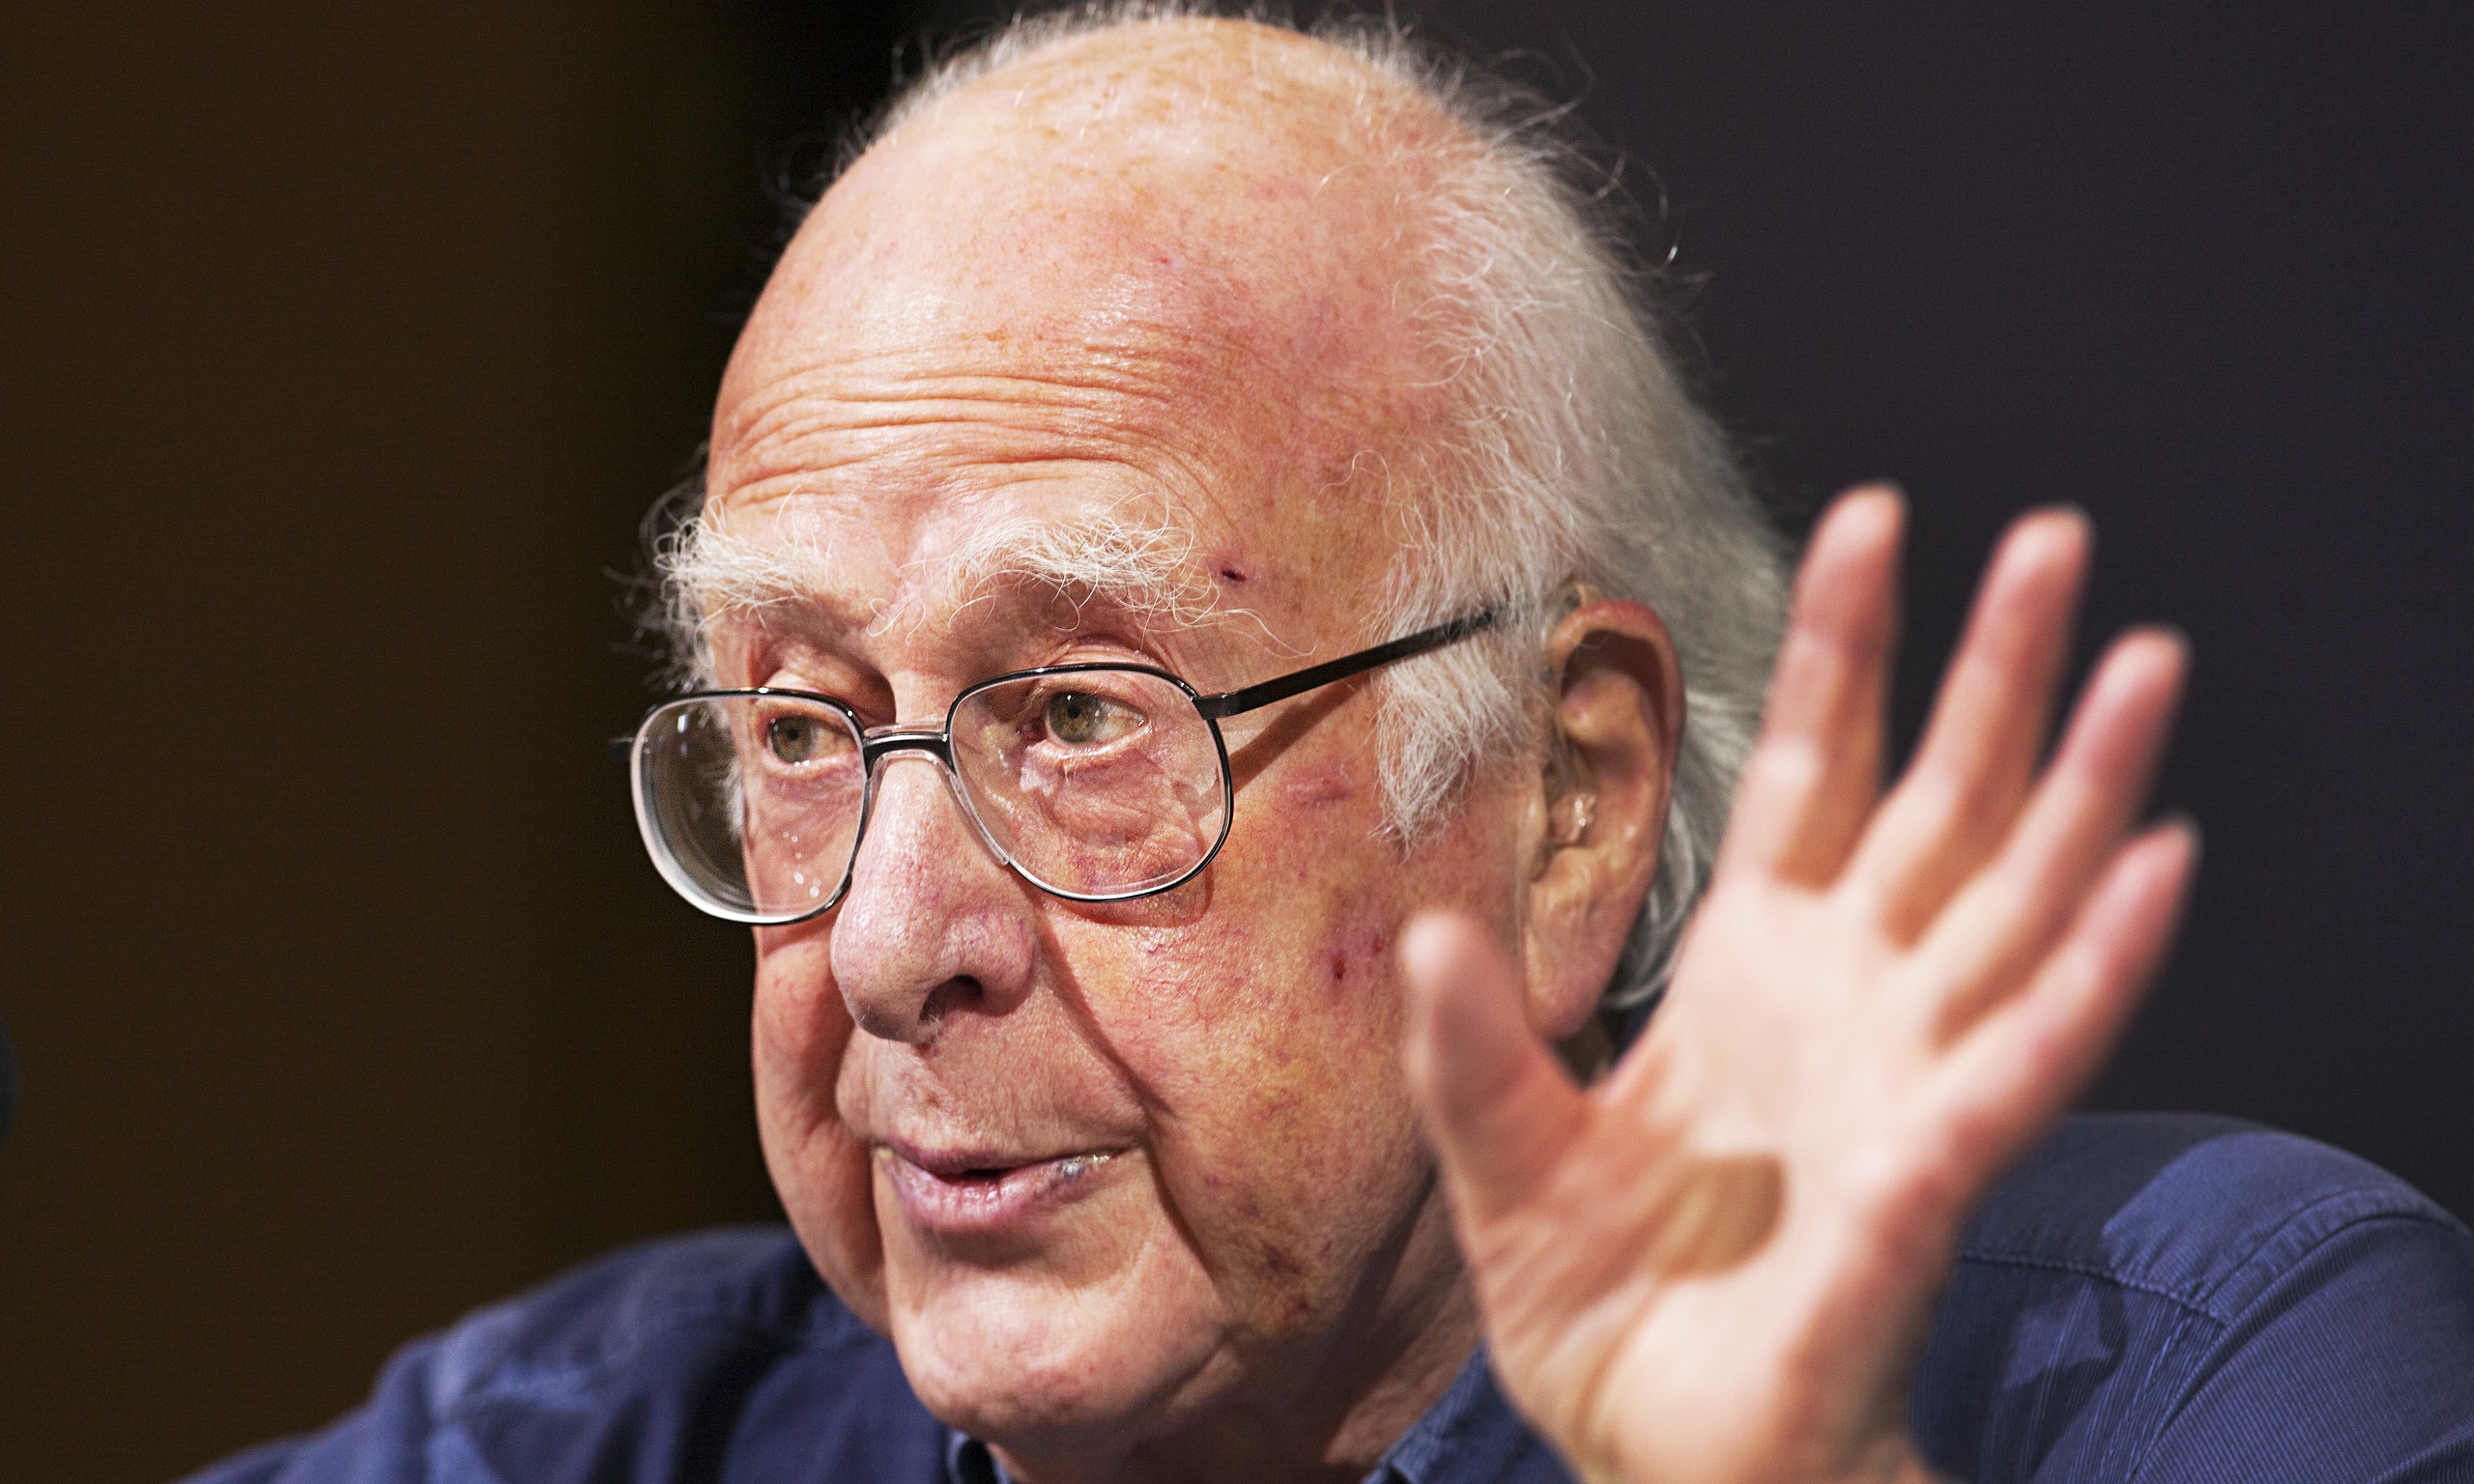 Father of 'the God particle' Peter Higgs says fame is a bit of a